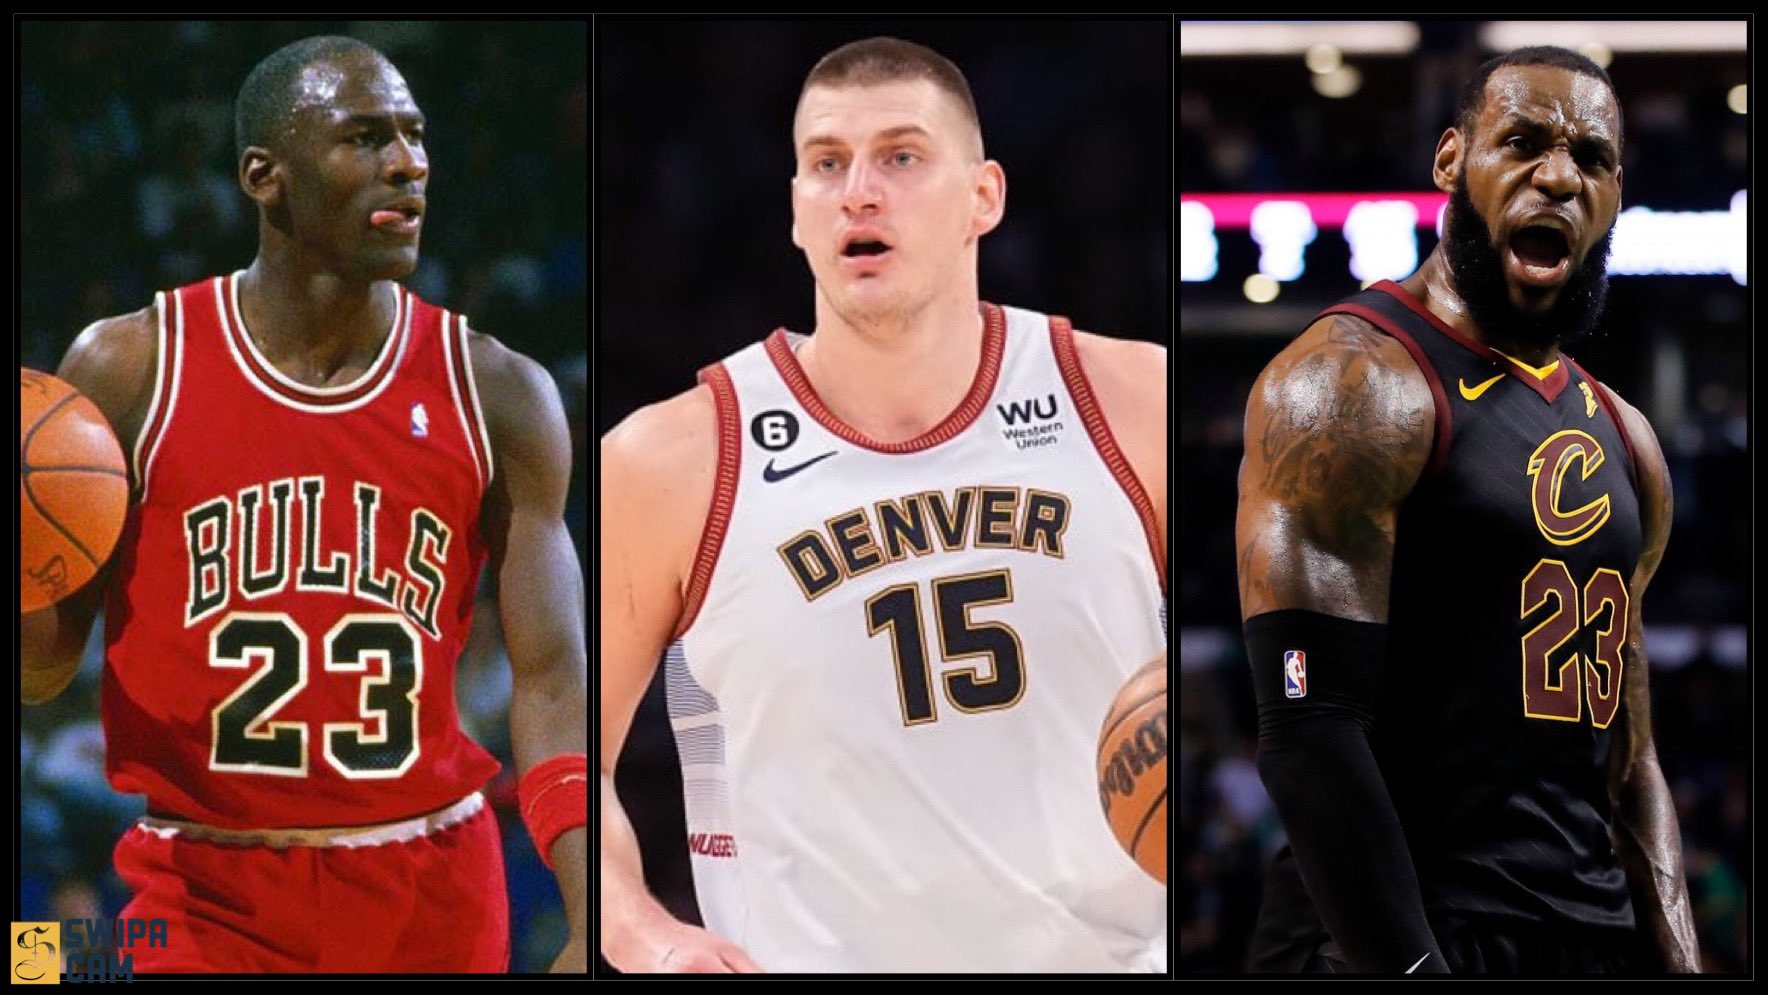 Swipa on X: "Top 3 PERs in NBA History: 1. Michael Jordan (27.91) 2. Nikola Jokic (27.65) 3. LeBron James (27.22) I guess the advance stats were painting the right picture all